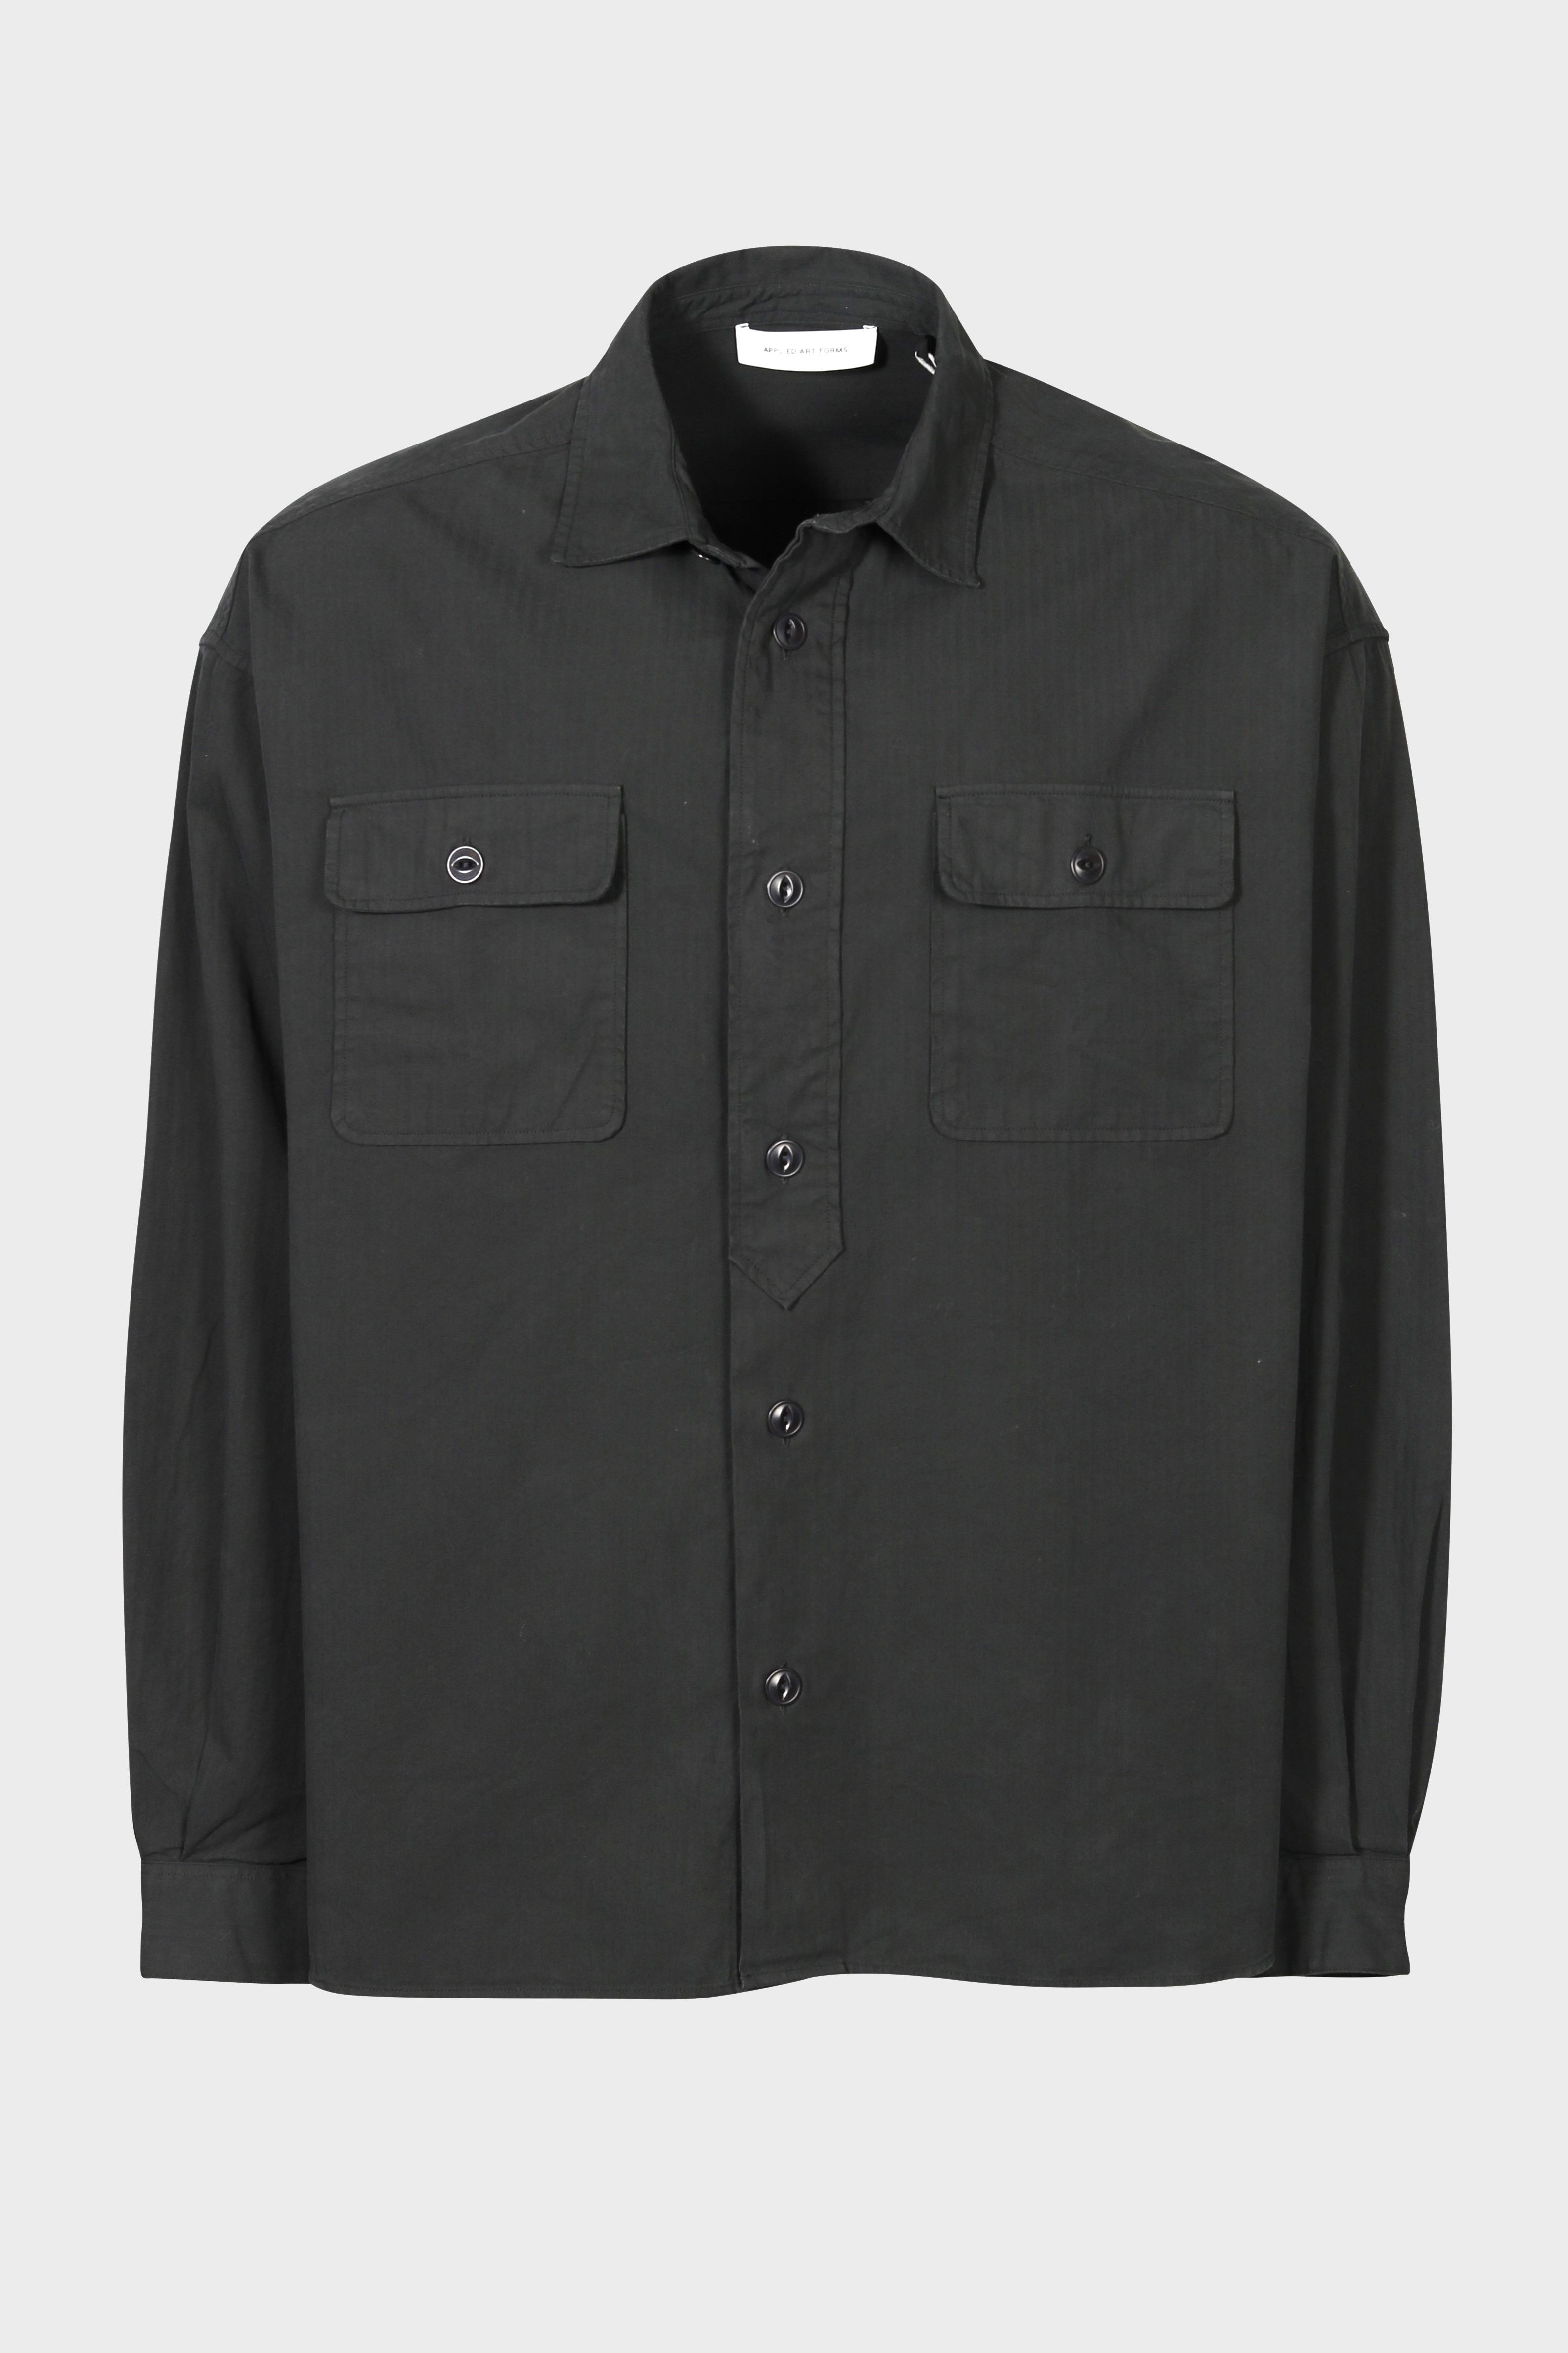 APPLIED ART FORMS Cotton Woven Overshirt in Charcoal M/L